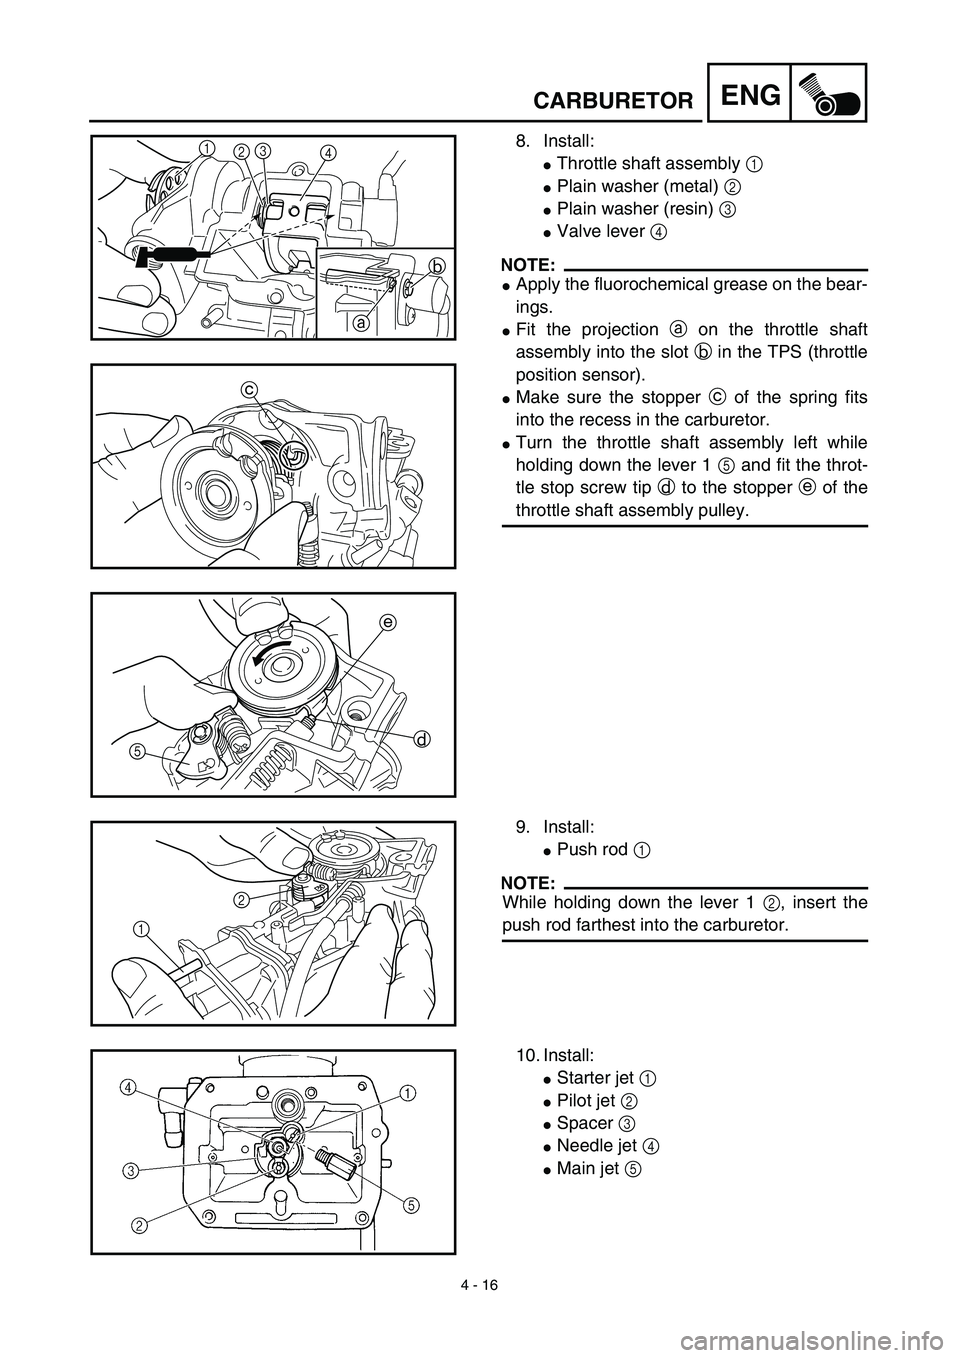 YAMAHA WR 450F 2003  Notices Demploi (in French) 4 - 16
ENGCARBURETOR
8. Install:
Throttle shaft assembly 1 
Plain washer (metal) 2 
Plain washer (resin) 3 
Valve lever 4 
NOTE:
Apply the fluorochemical grease on the bear-
ings.
Fit the projec